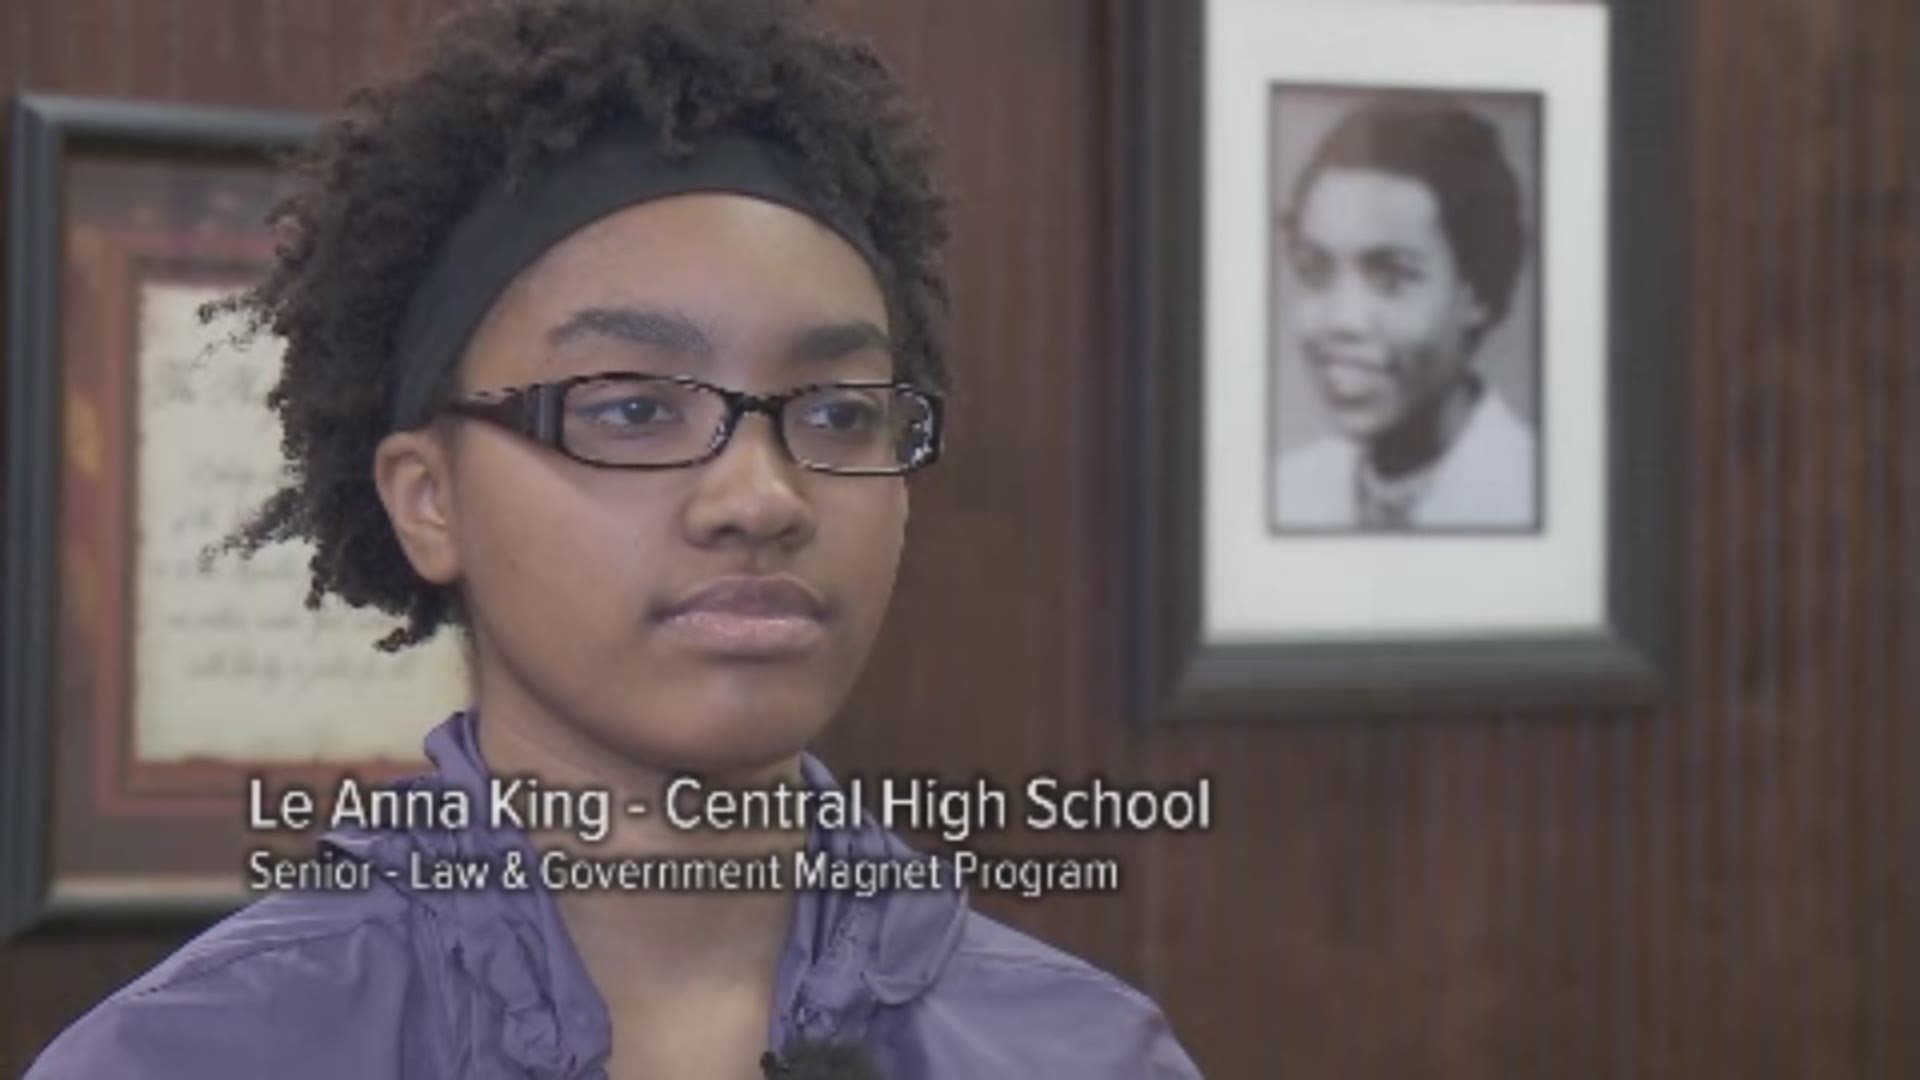 WHAS11 Reporter Derrick Rose sat down with students and talked about Alberta Jones.